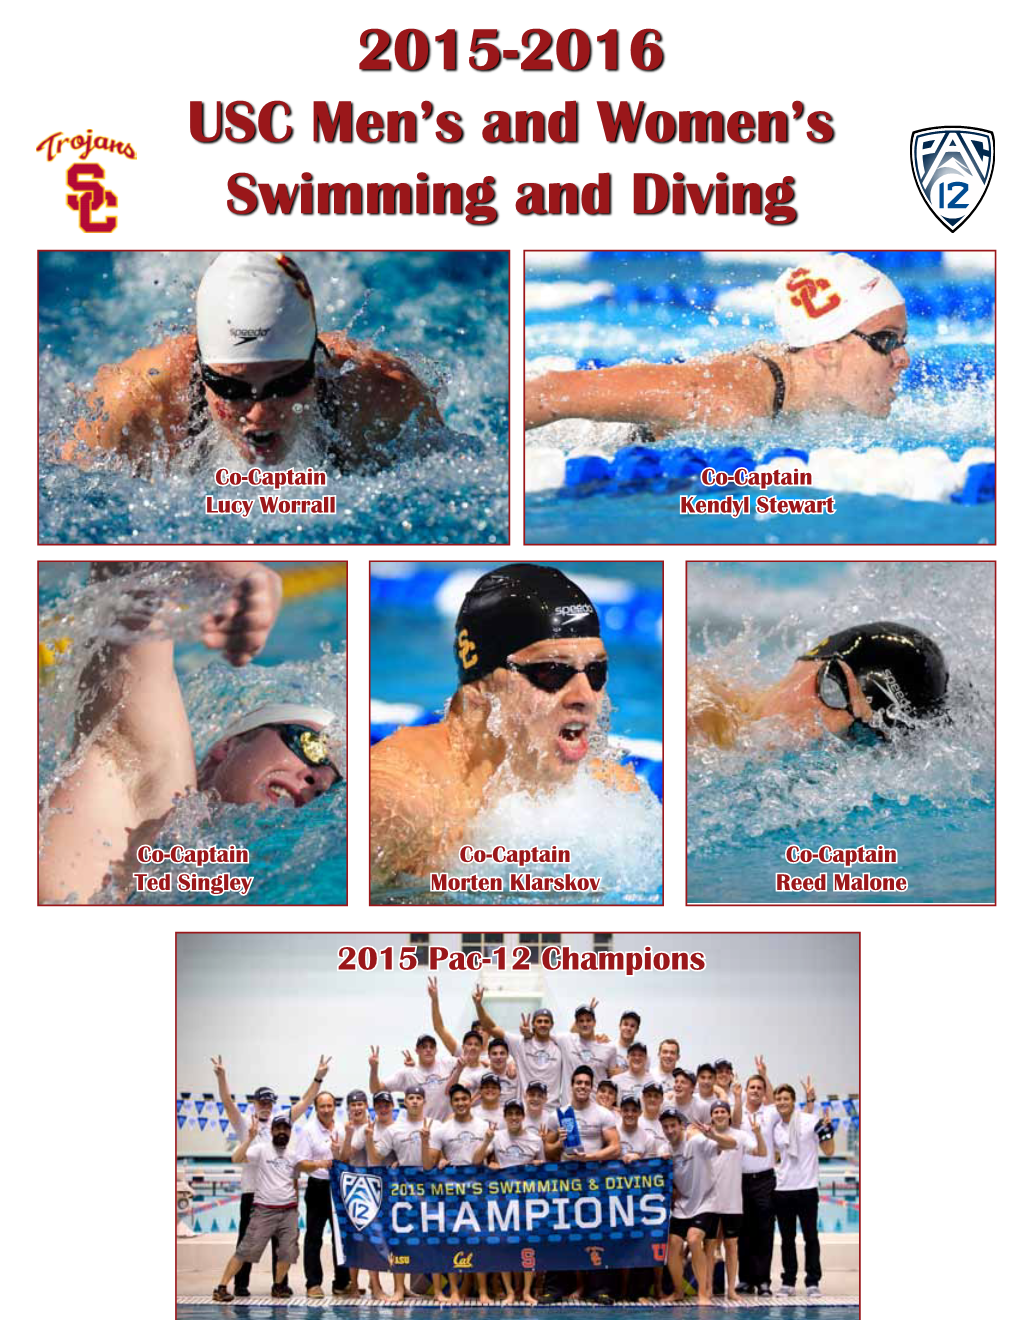 2015-2016 USC Men's and Women's Swimming and Diving